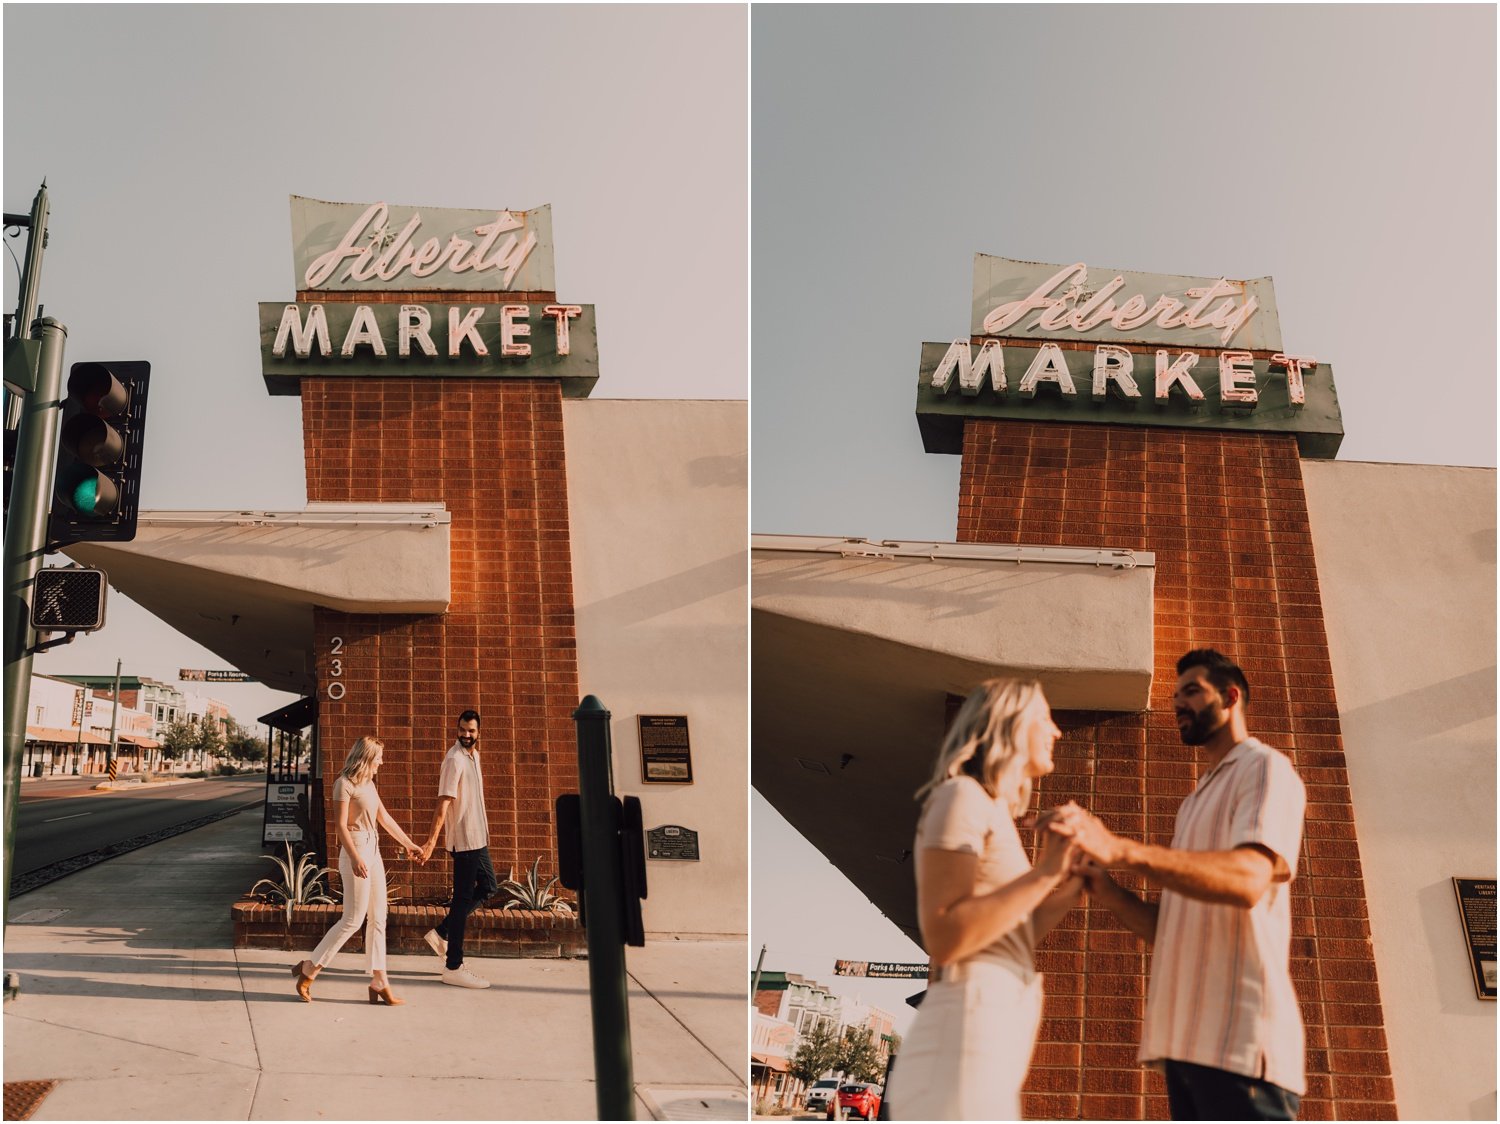 photos of couple together on a date at liberty market in gilbert, arizona